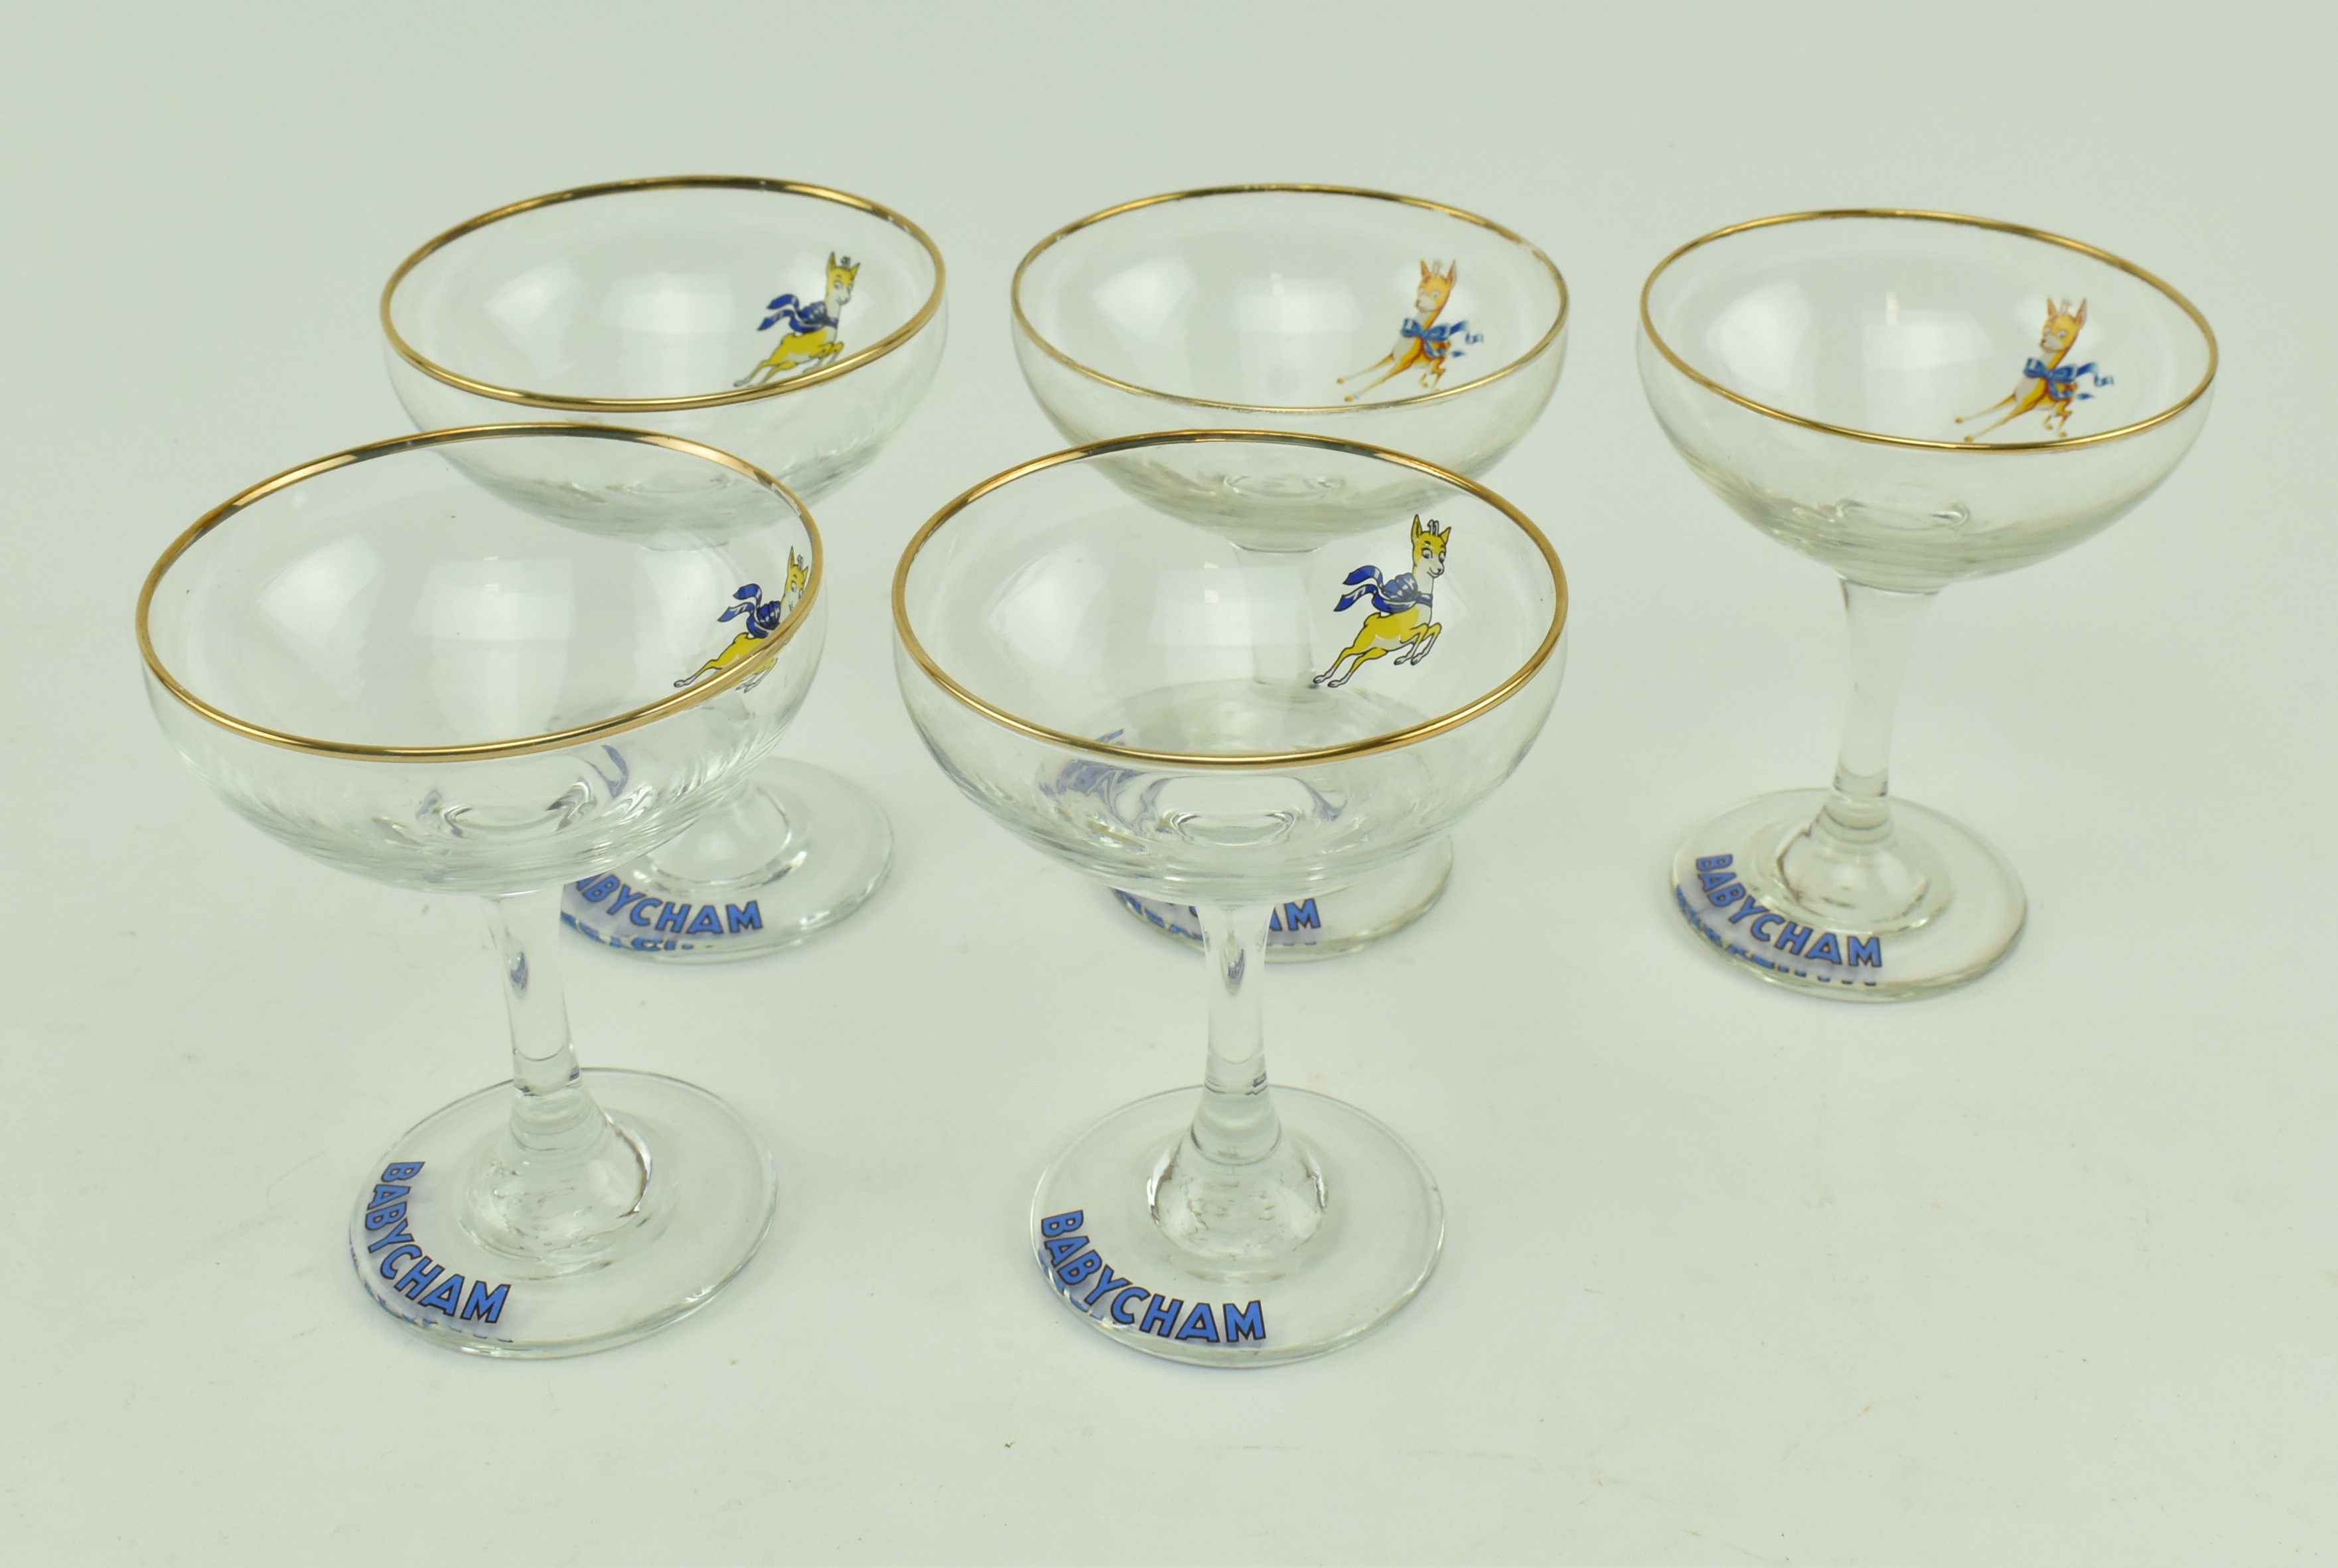 BABYCHAM - COLLECTION OF NINE VINTAGE CHAMPAGNE COUPES - Image 6 of 11